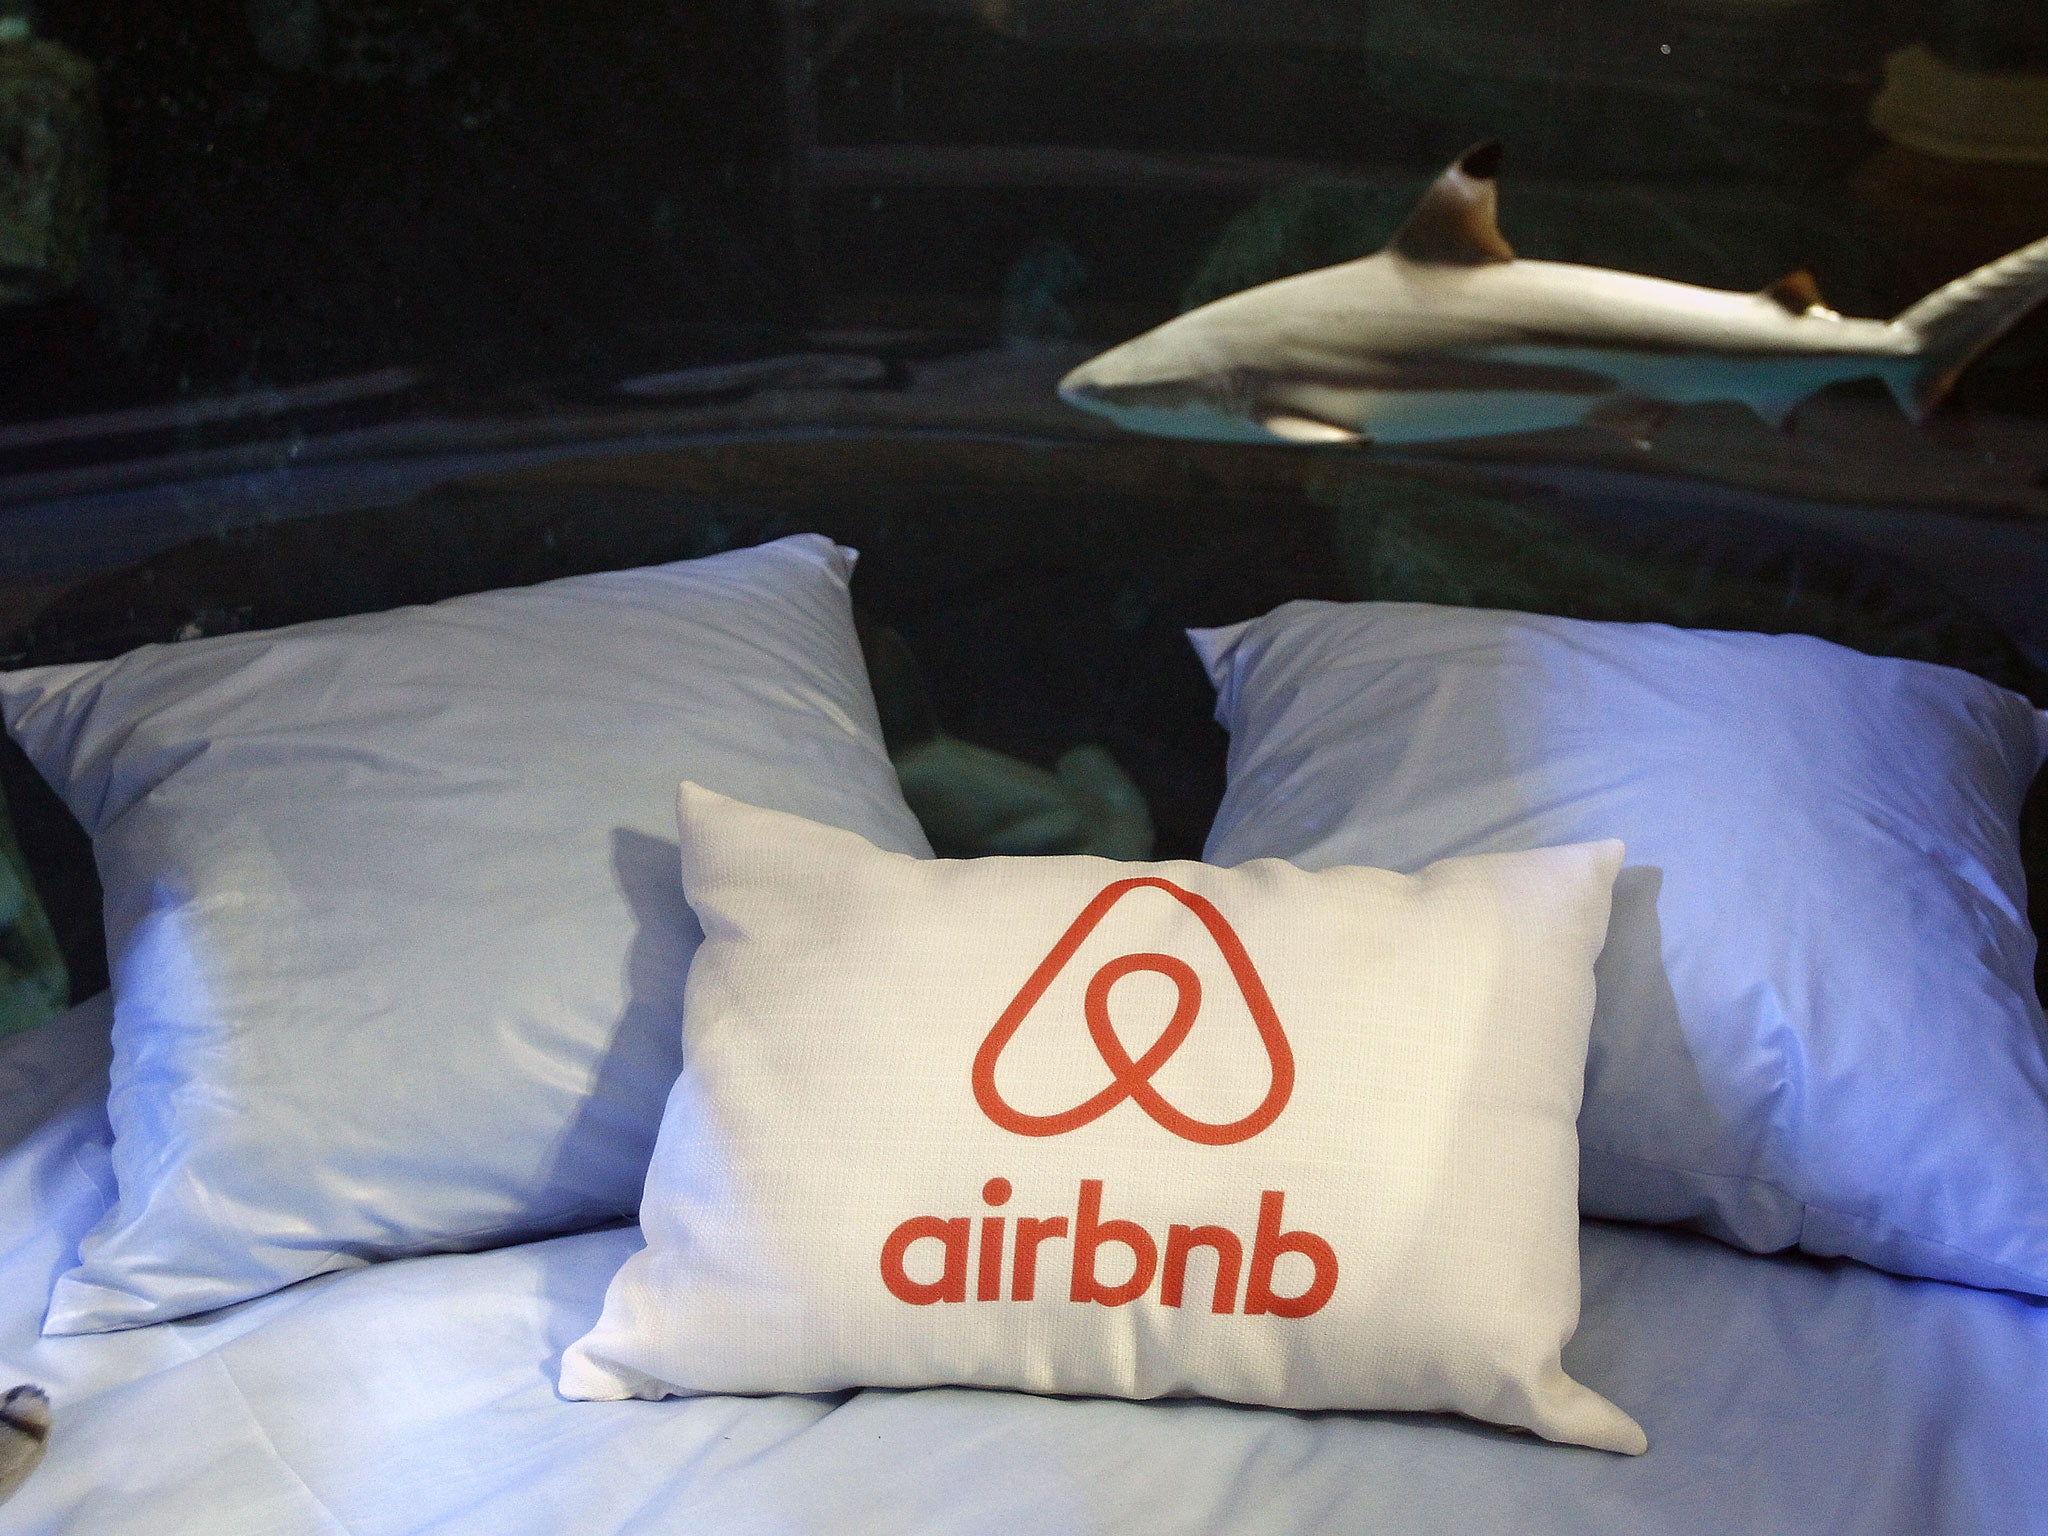 Berlin authorities have banned tourists from renting entire apartment trough Airbnb last month